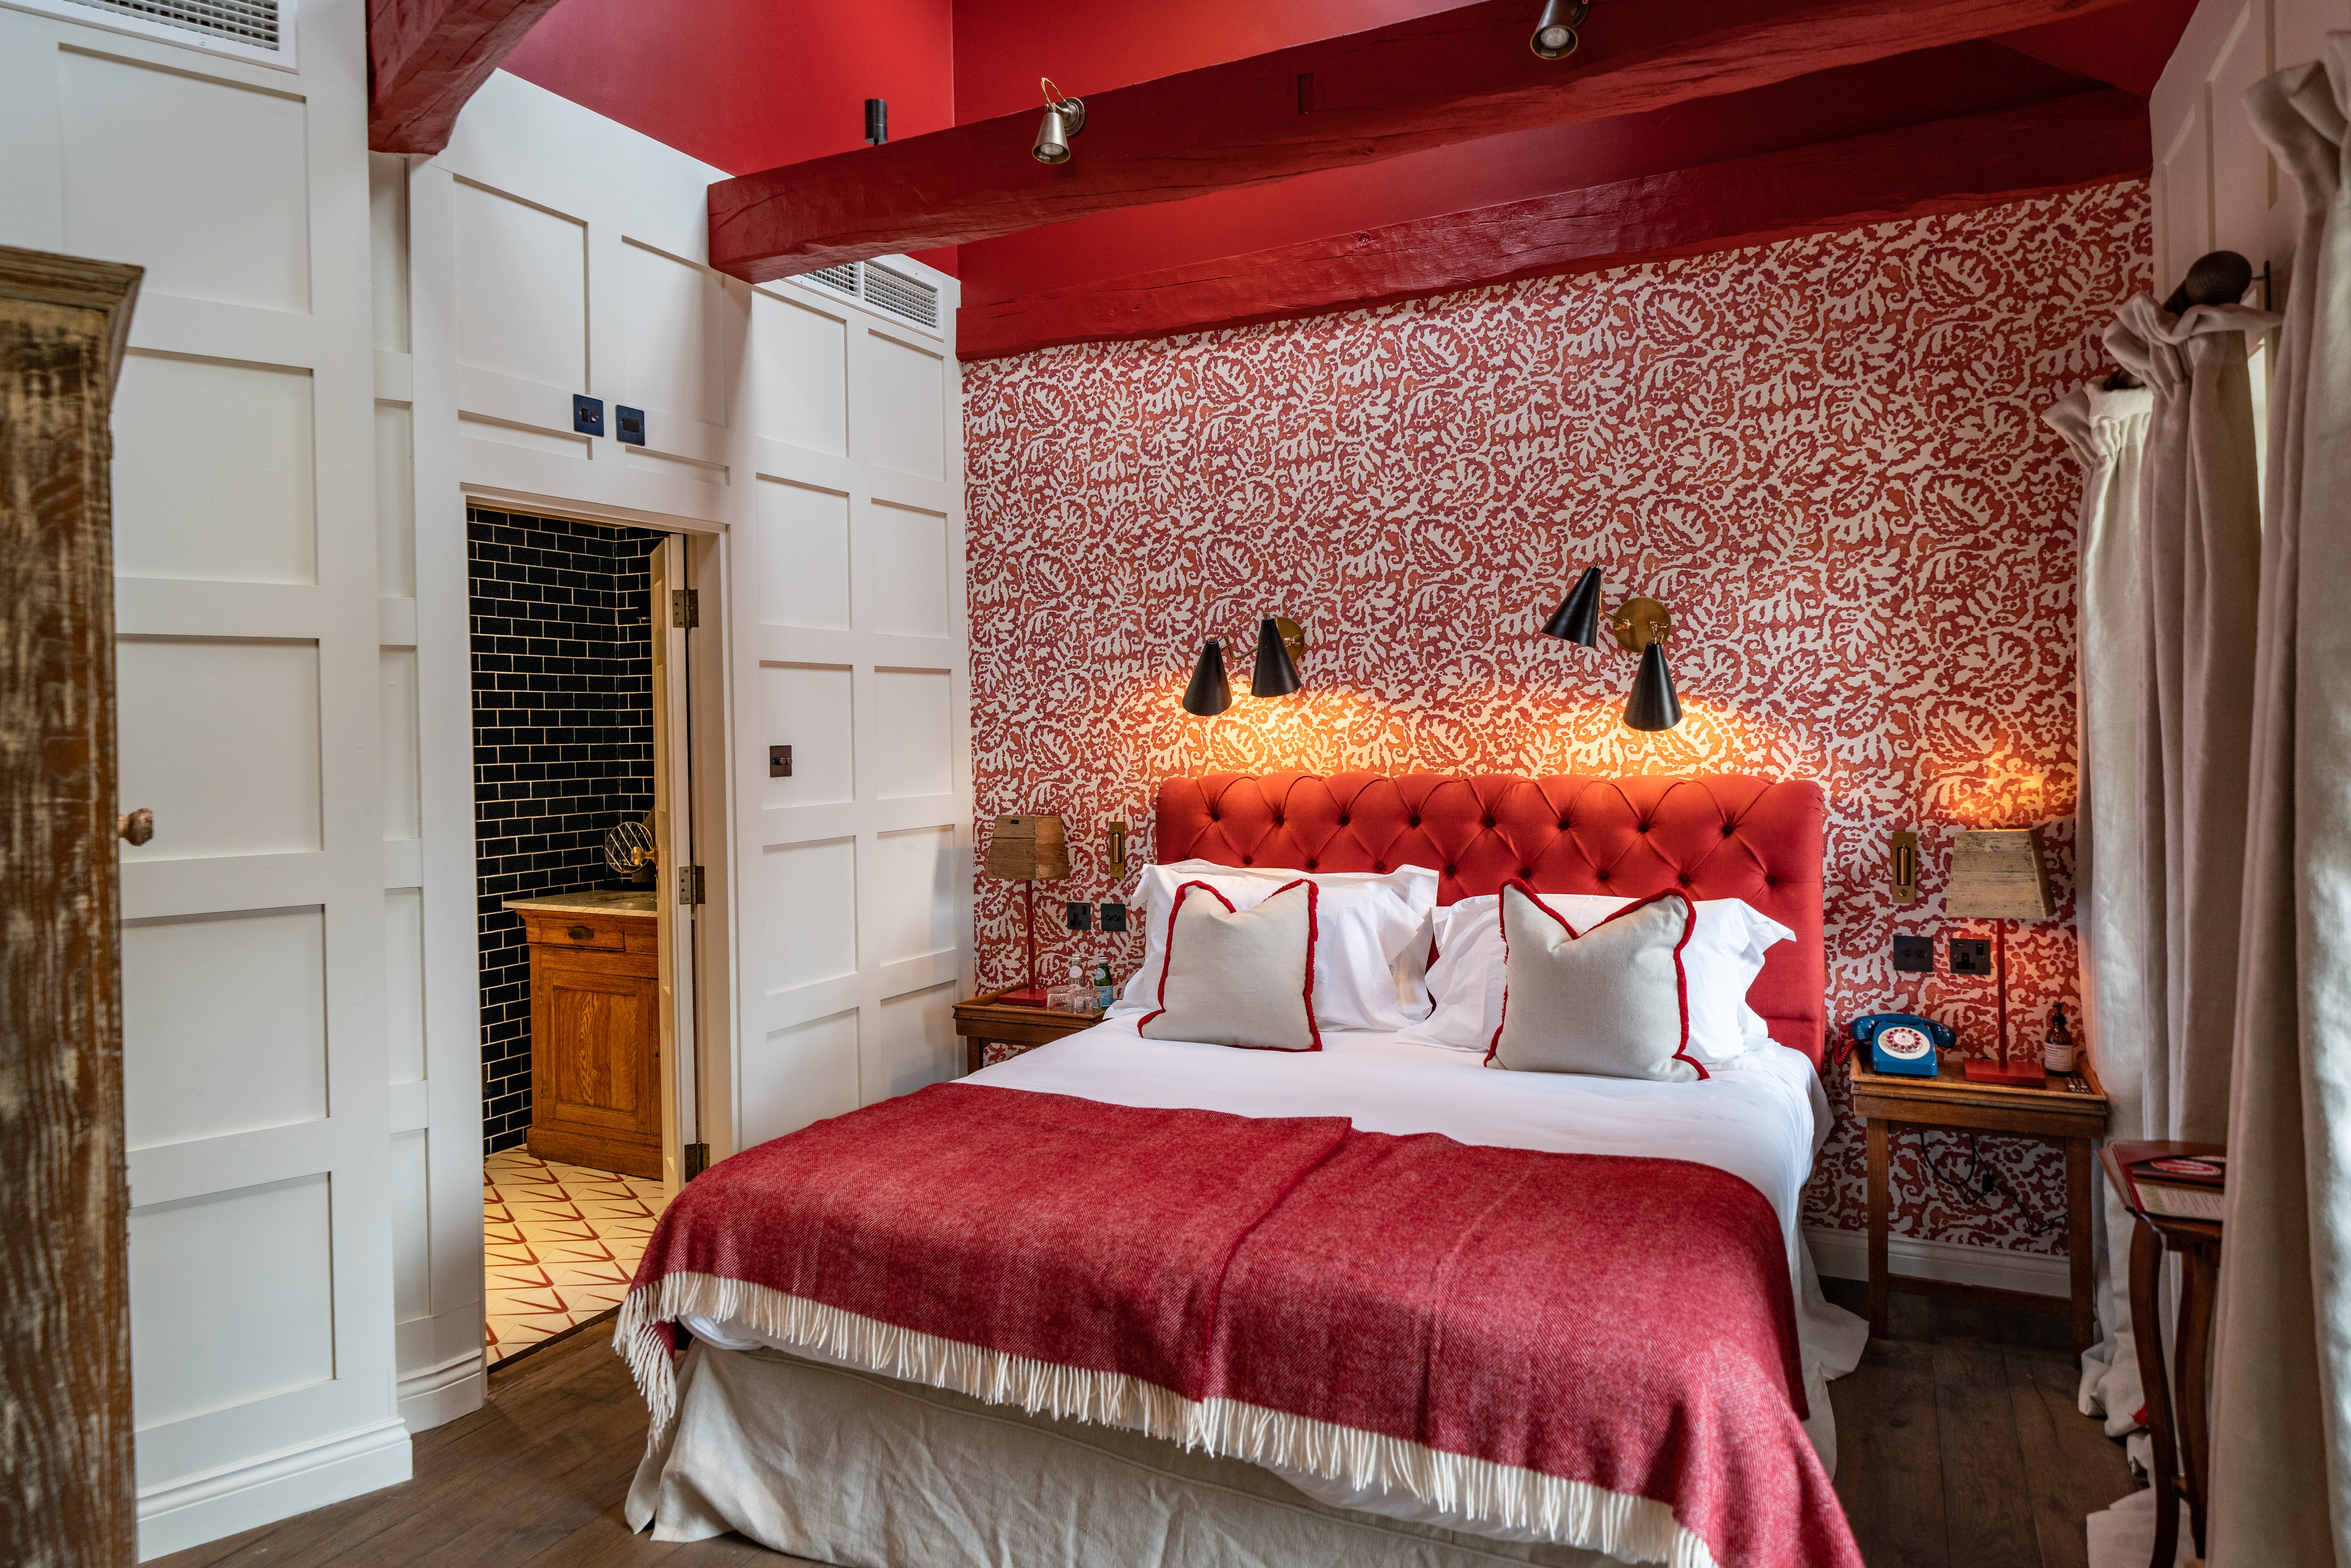 The Double Red Duke has pet-friendly rooms, with a charge of ?25 per night